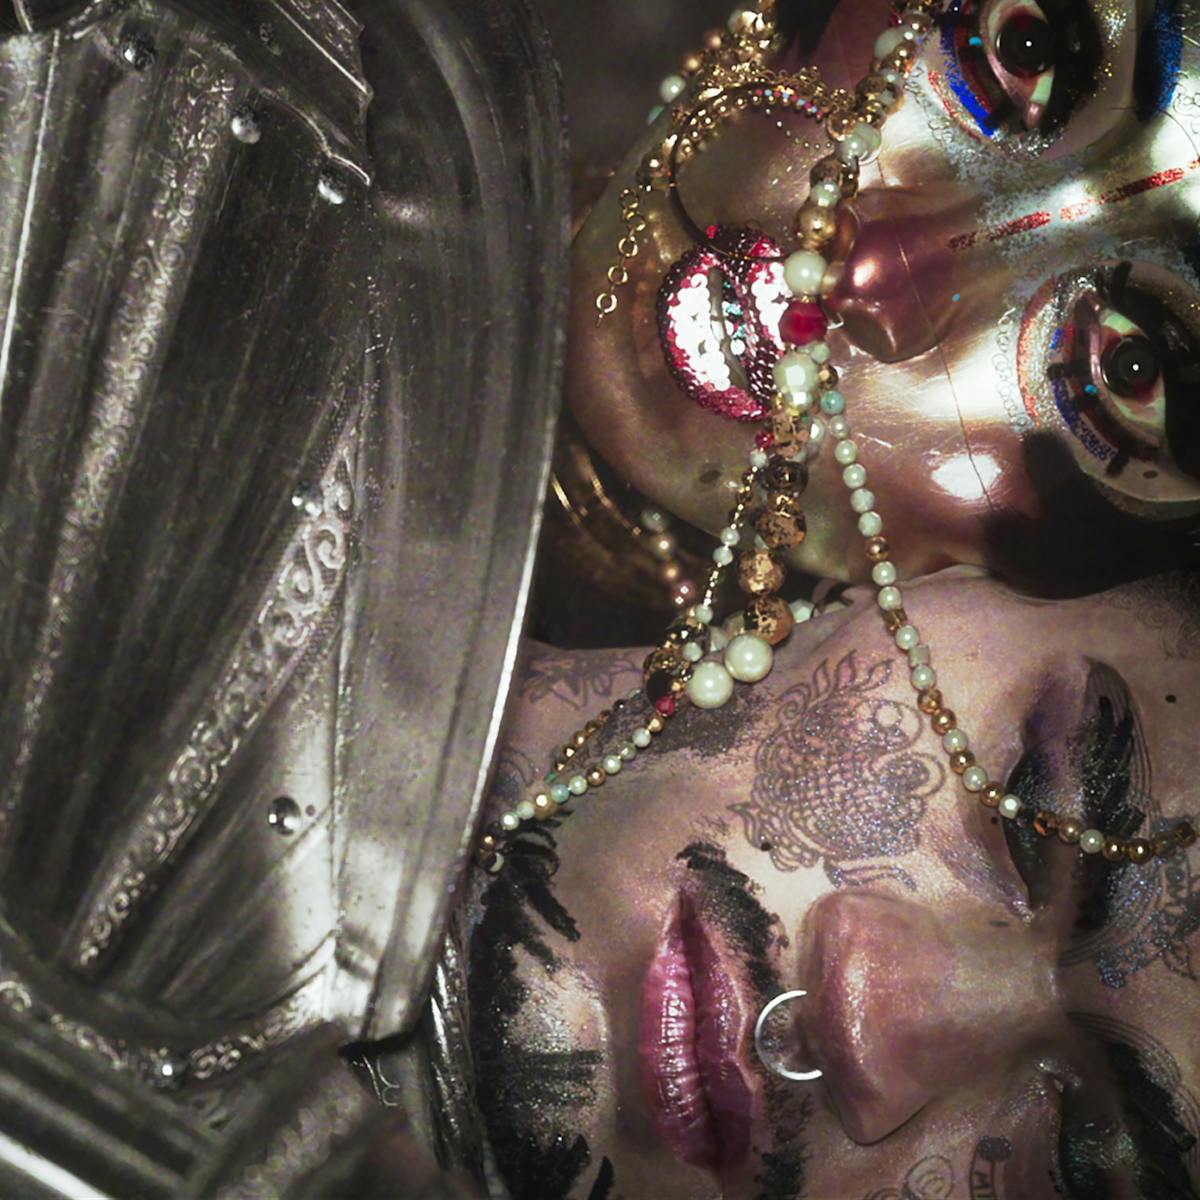 A soldier with a tattooed face and nose ring rests against a siren with a glittery painted face. Across their faces are a string of beads, and a plate of armour.